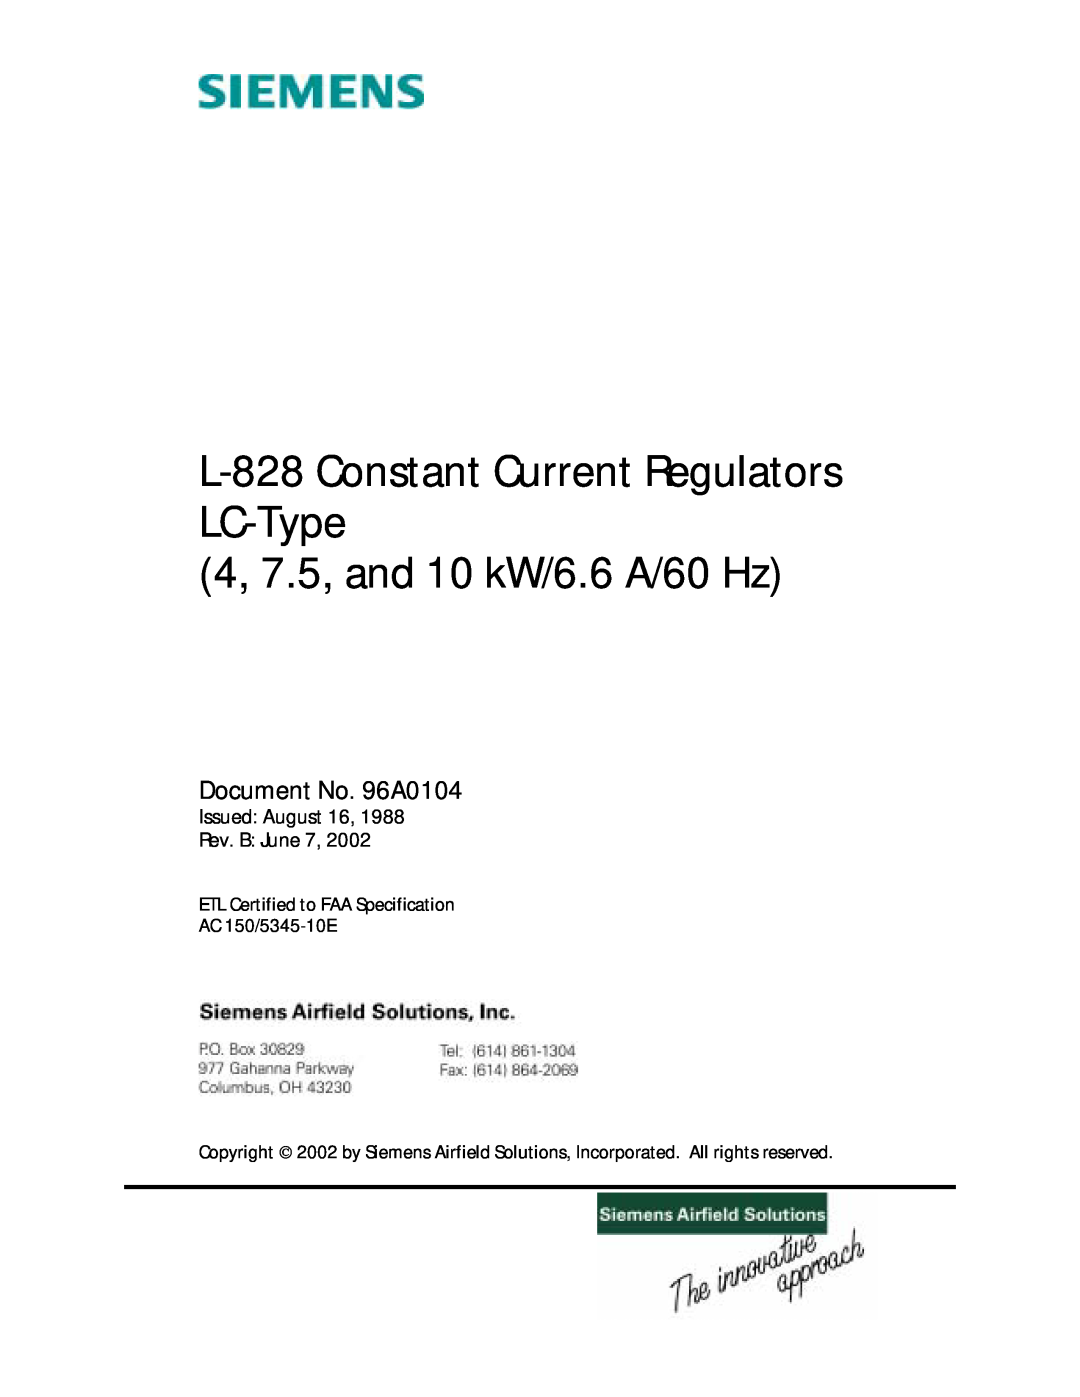 Siemens manual L-828Constant Current Regulators LC-Type, 4, 7.5, and 10 kW/6.6 A/60 Hz, Document No. 96A0104 